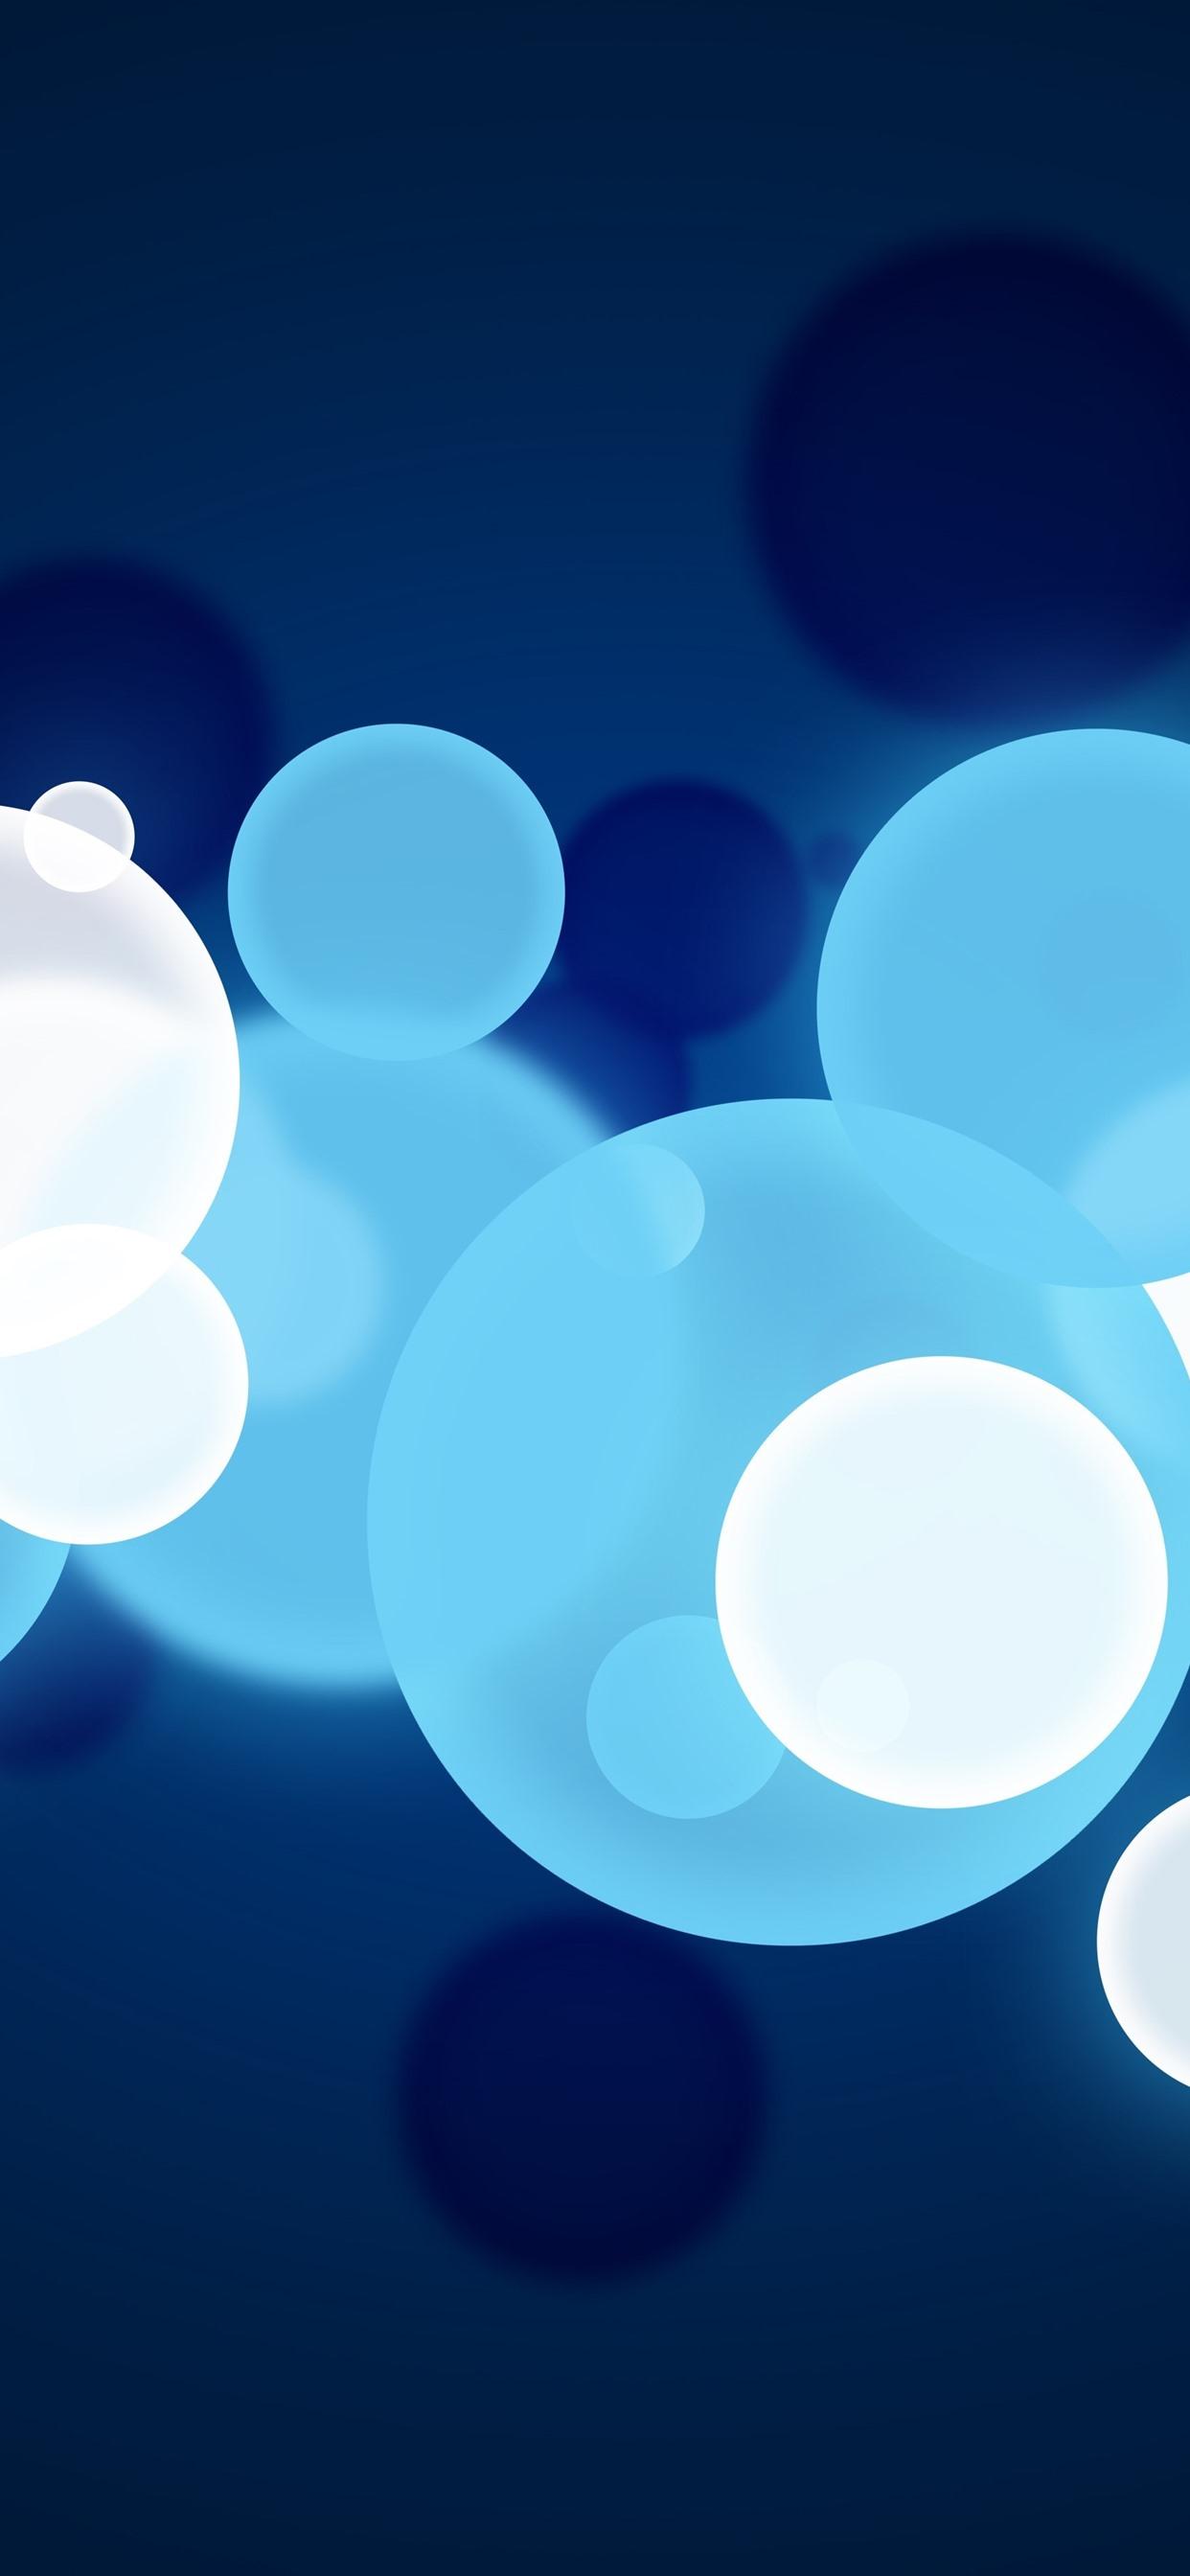 Blue and white bubbles, abstract 1242x2688 iPhone XS Max